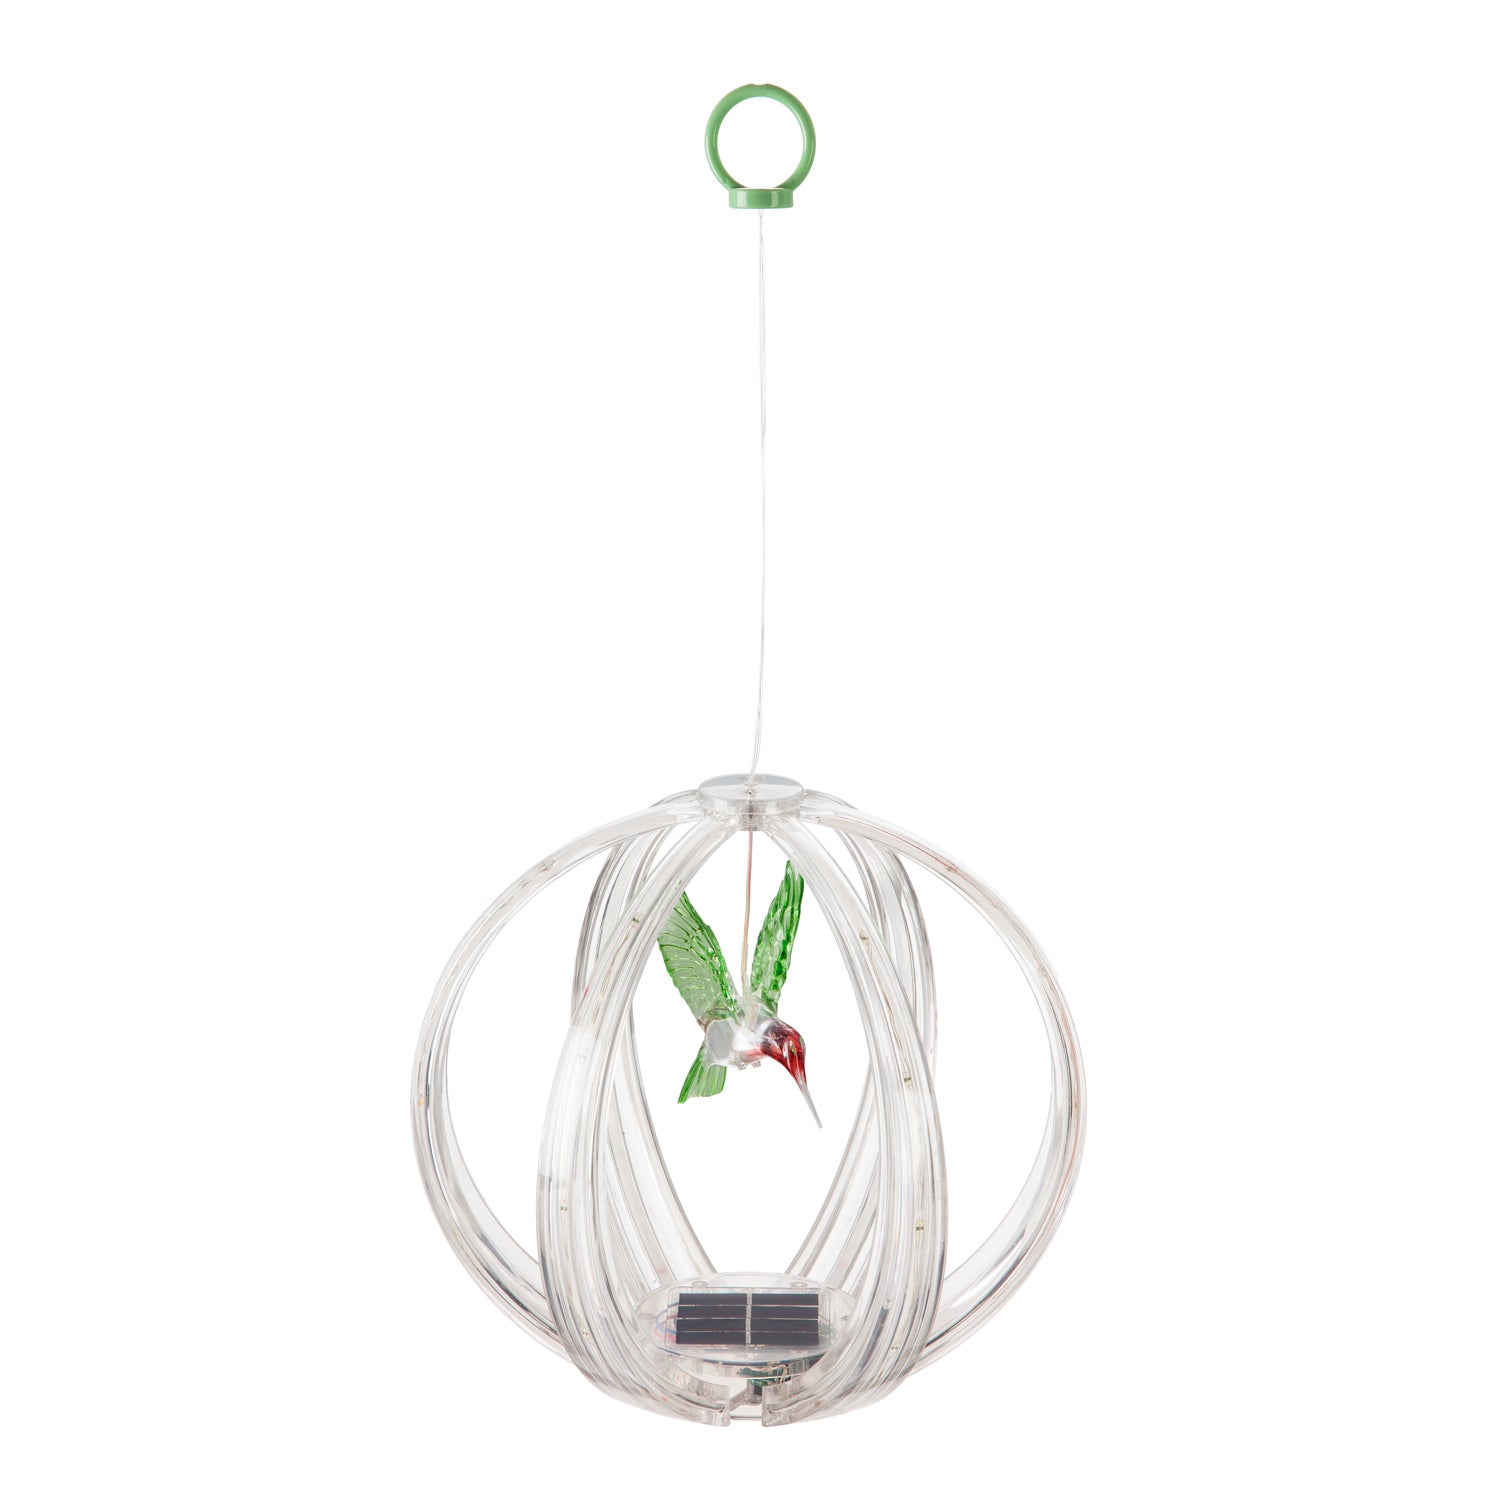 Hummingbird Solar Mobile Sphere with Multicolor Chasing Light Display